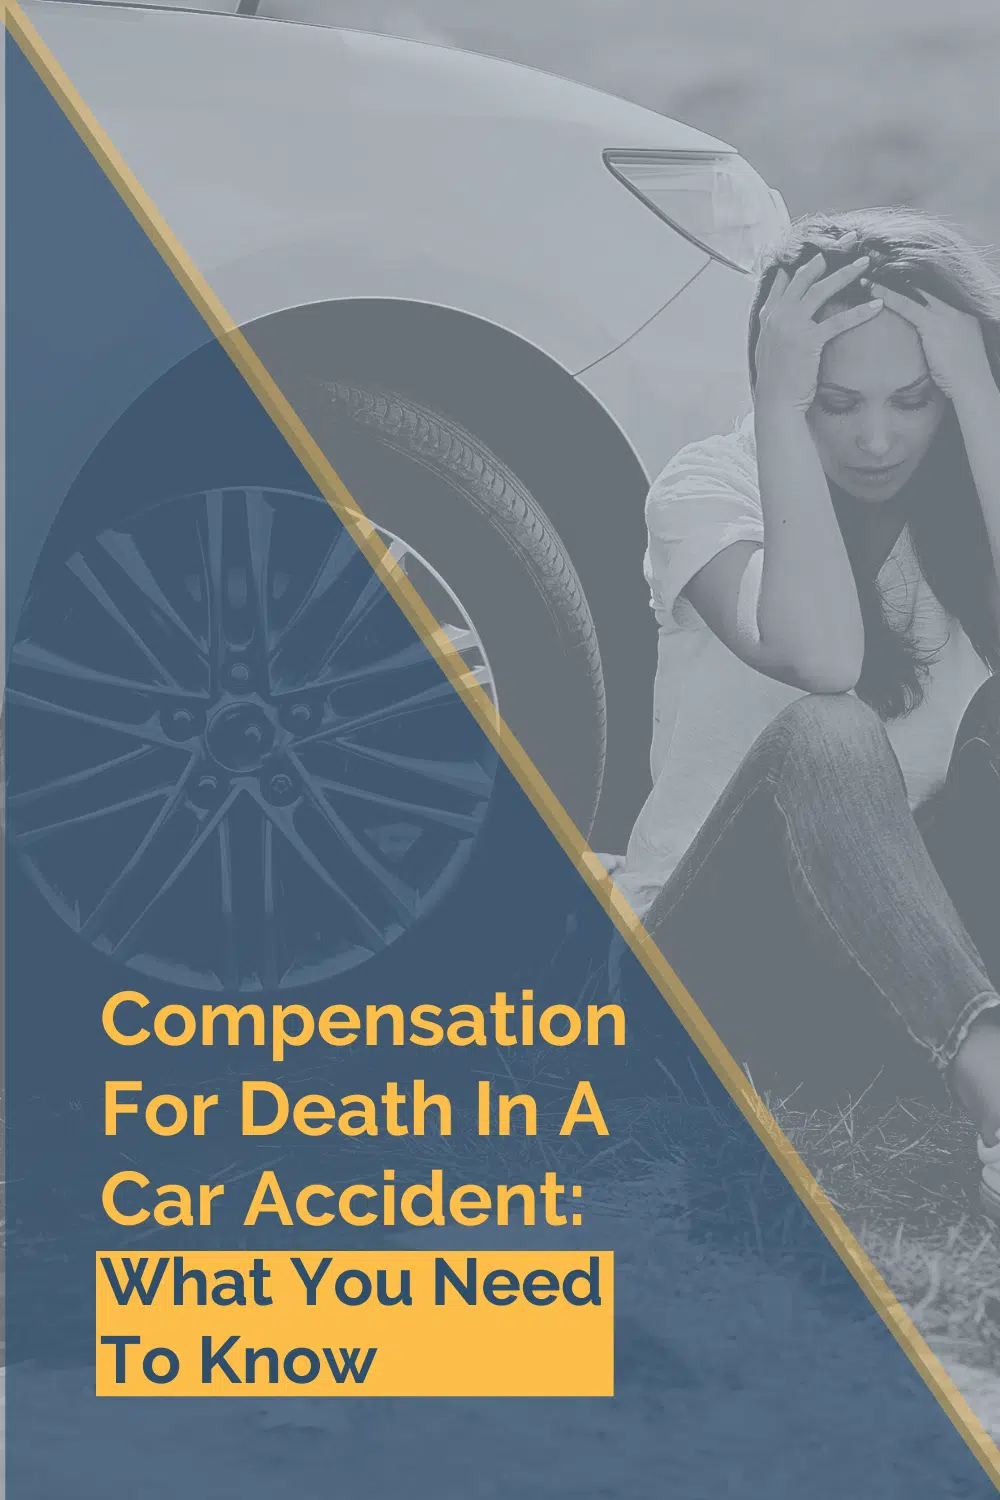 Compensation For Death In Car Accident: What You Need To Know